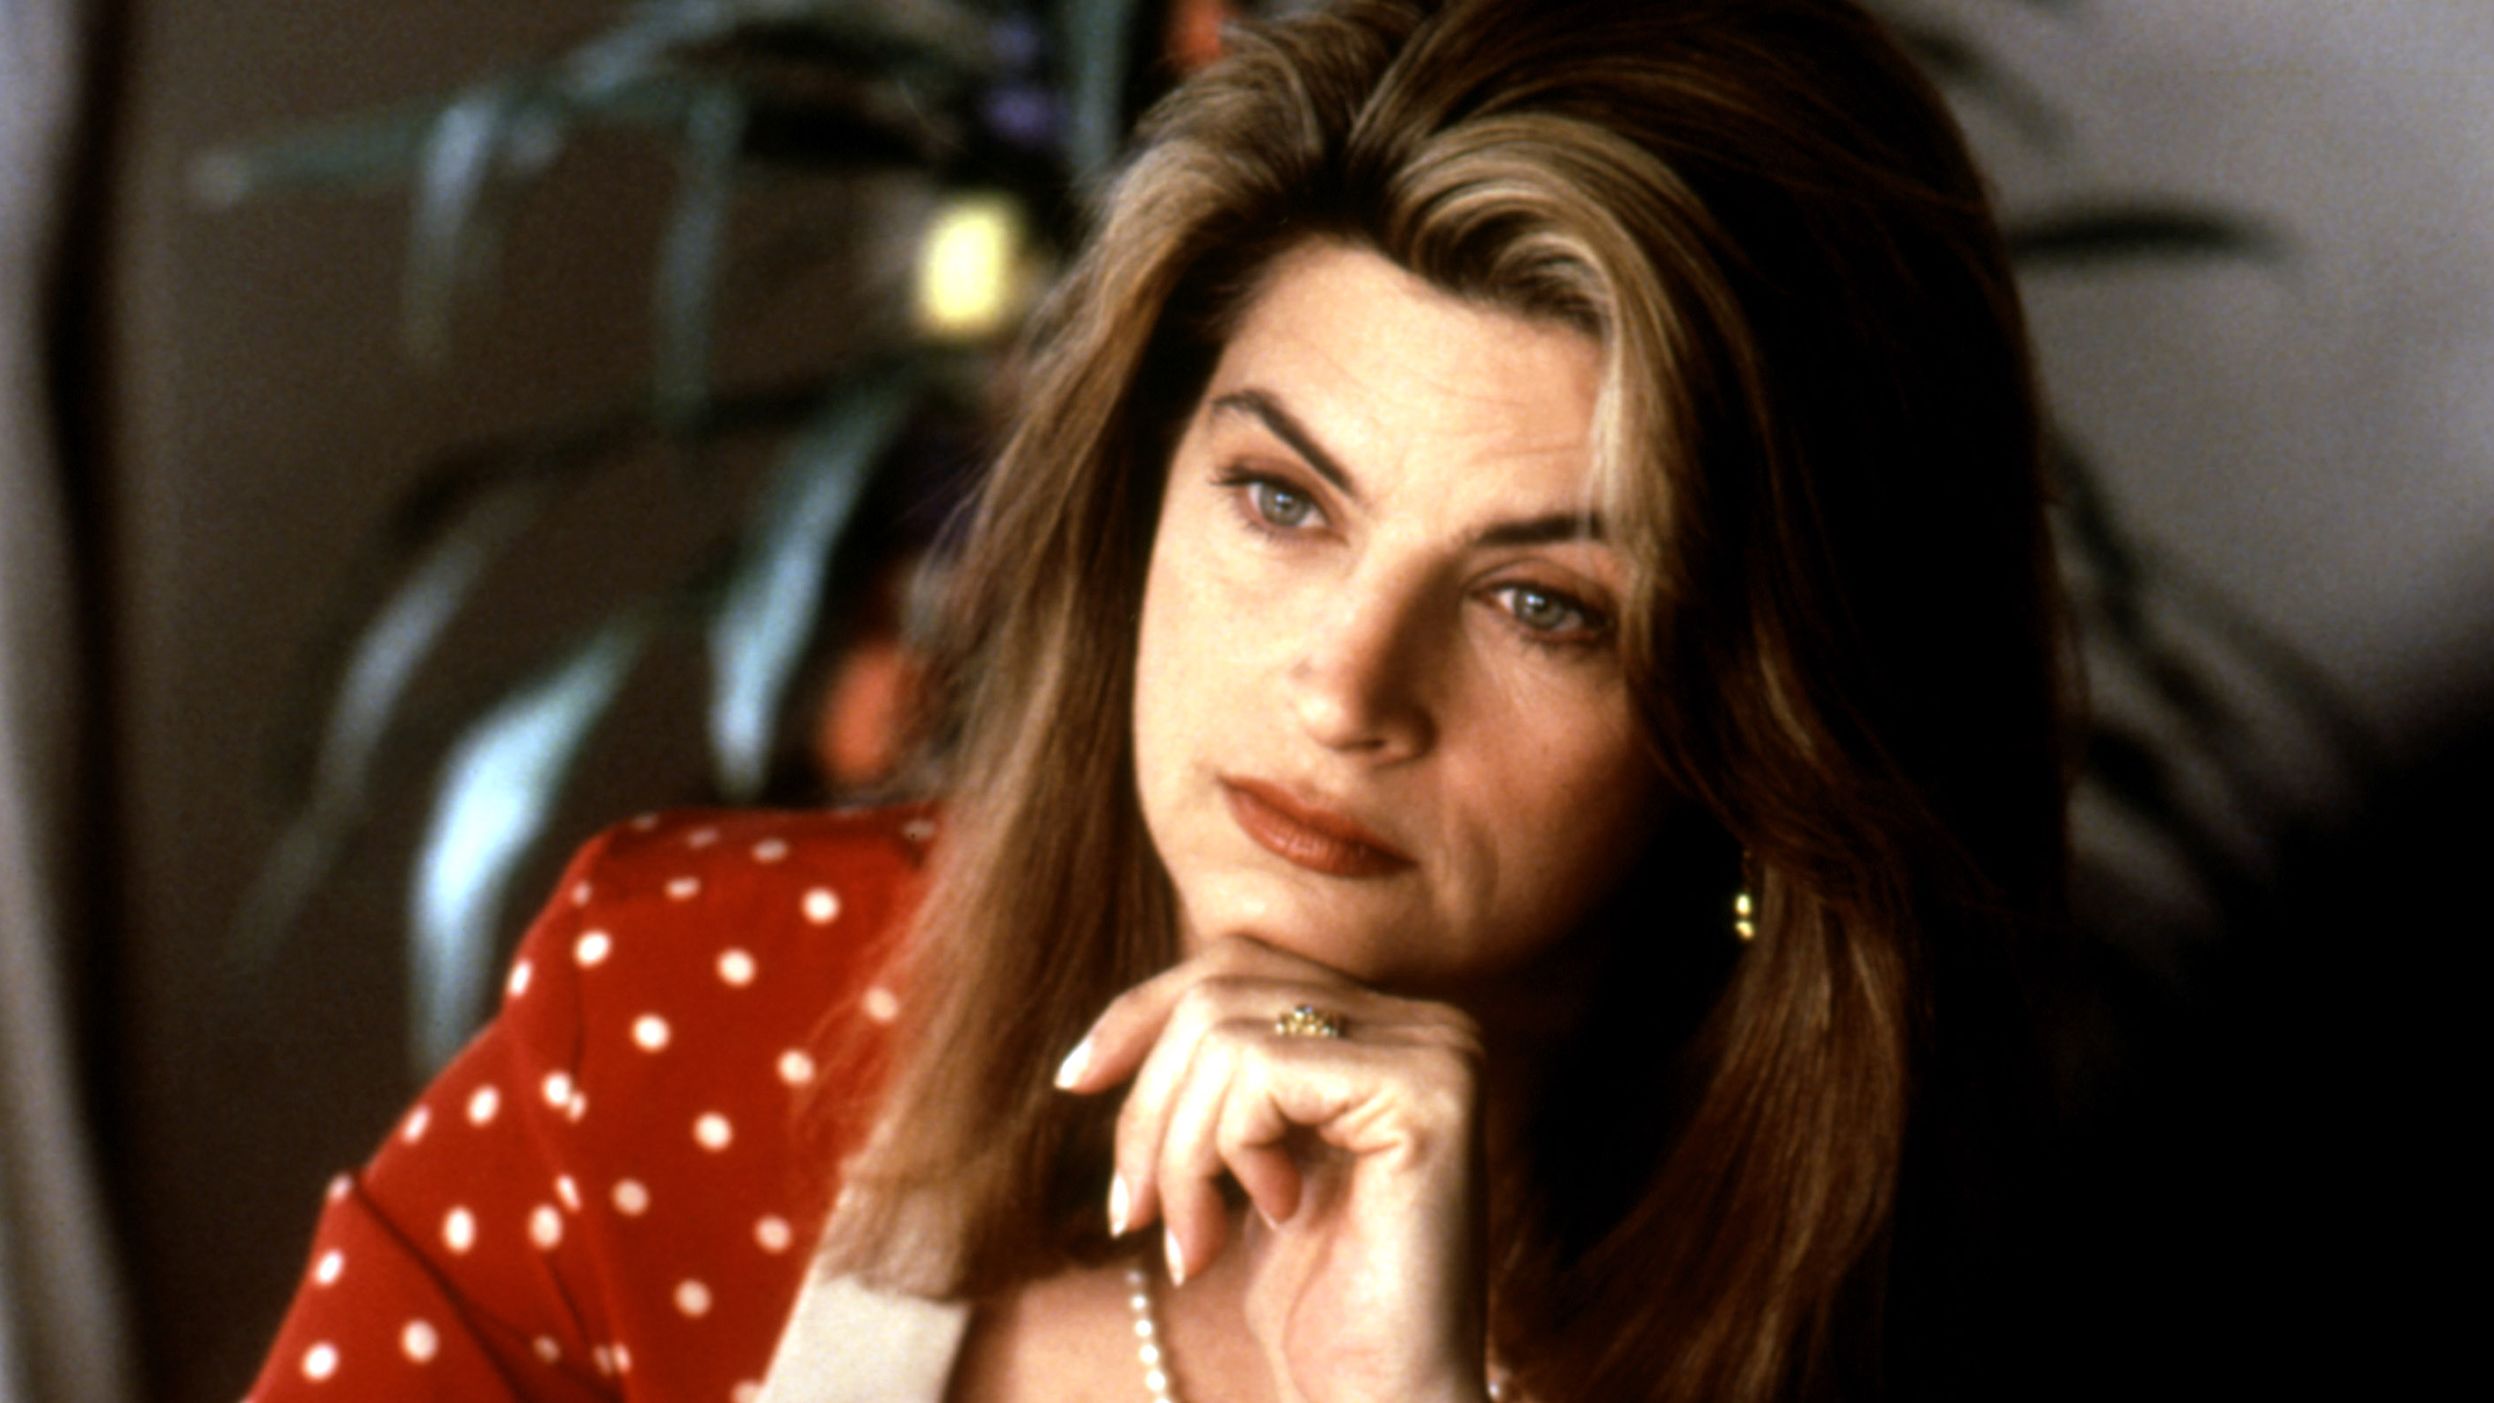 Actress <a href="https://www.cnn.com/2022/12/05/entertainment/kirstie-alley-obit/index.html" target="_blank">Kirstie Alley,</a> who starred in "Cheers" and "Veronica's Closet," died after a brief battle with cancer, her children announced on social media on December 5. She was 71.